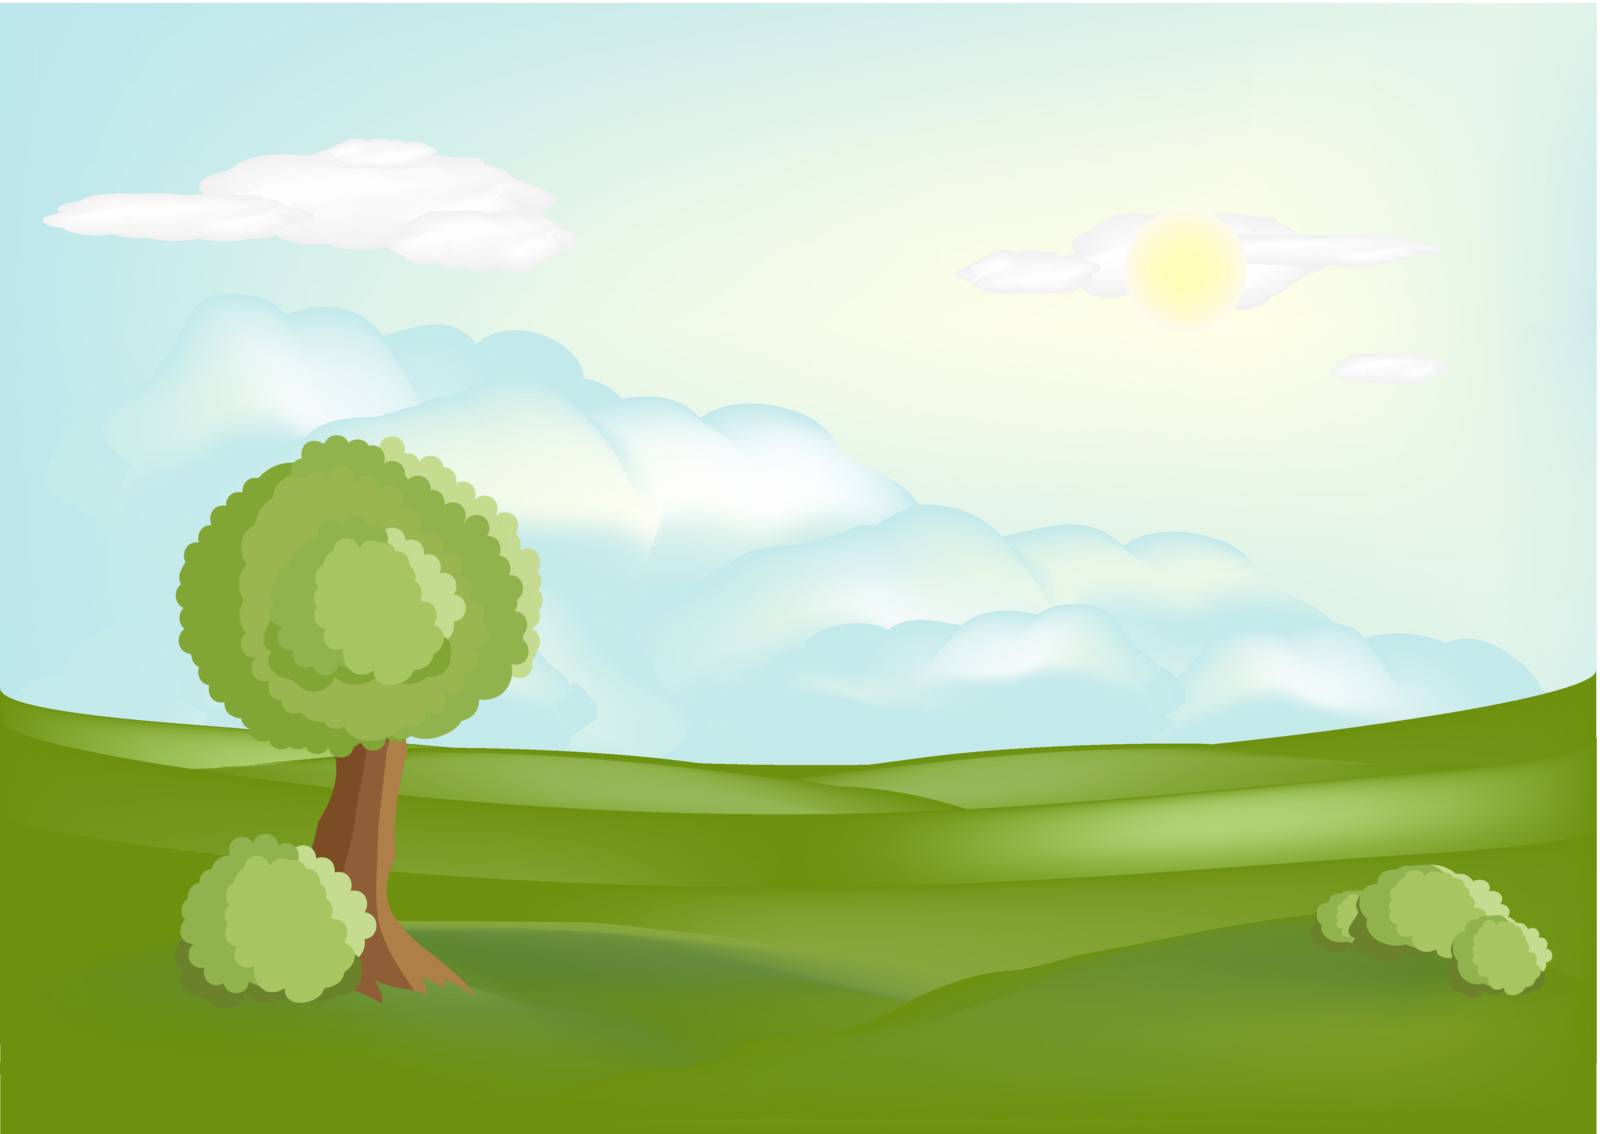 Illustrated summer landscape with the sun, clouds, field and tree